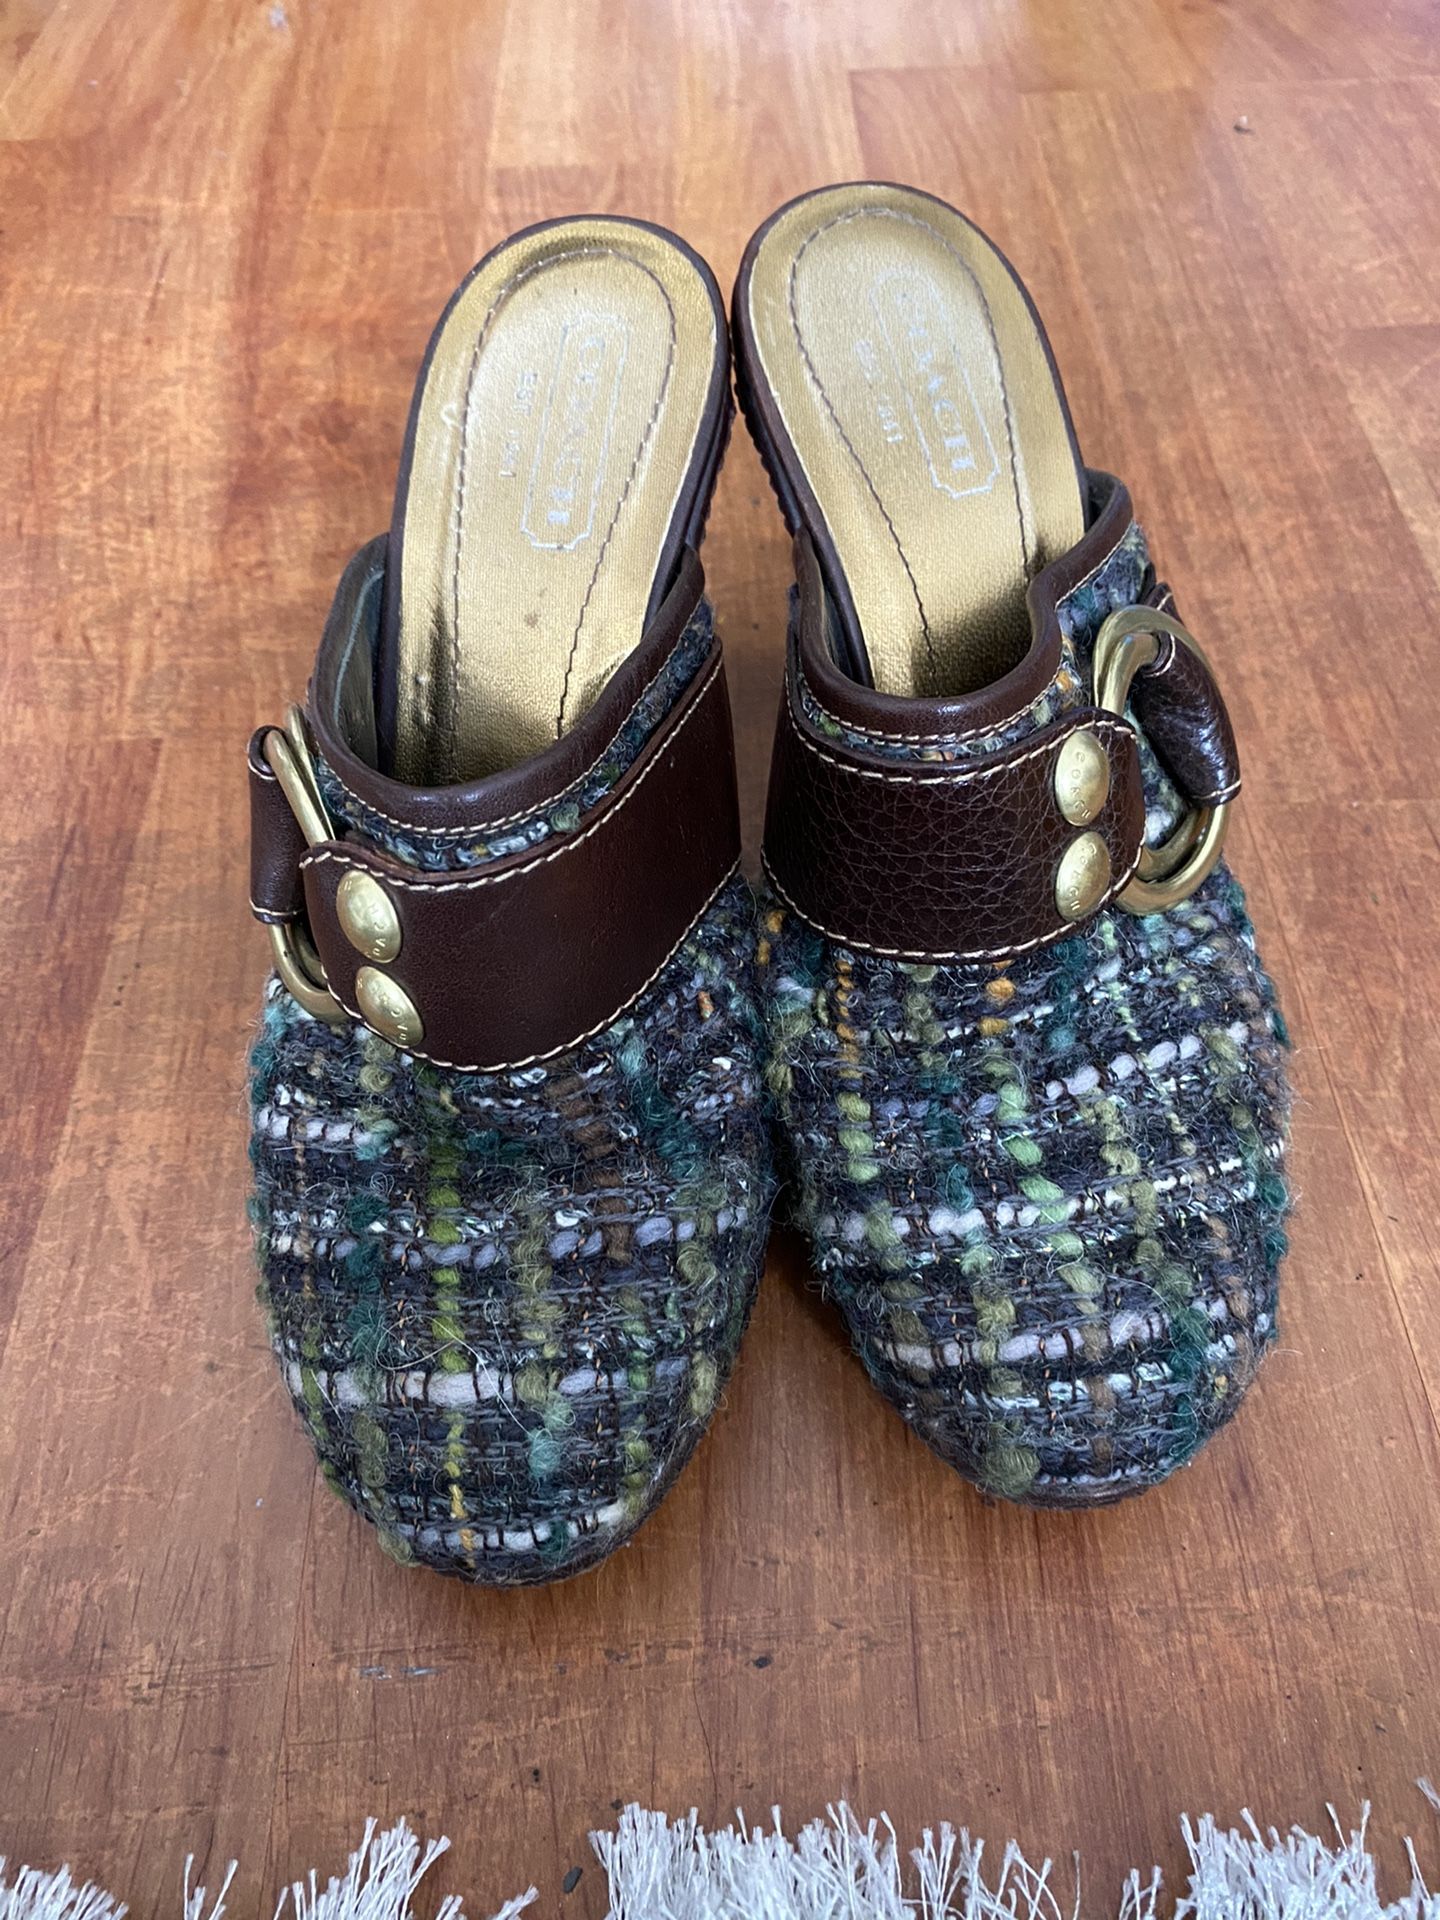 COACH CLAUDE BOUCLE TWEED LEATHER MULE SLIDE BOOT HIGH HEEL GREEN 6. Condition is "Pre-owned". See pictures ask questions and make an offer!